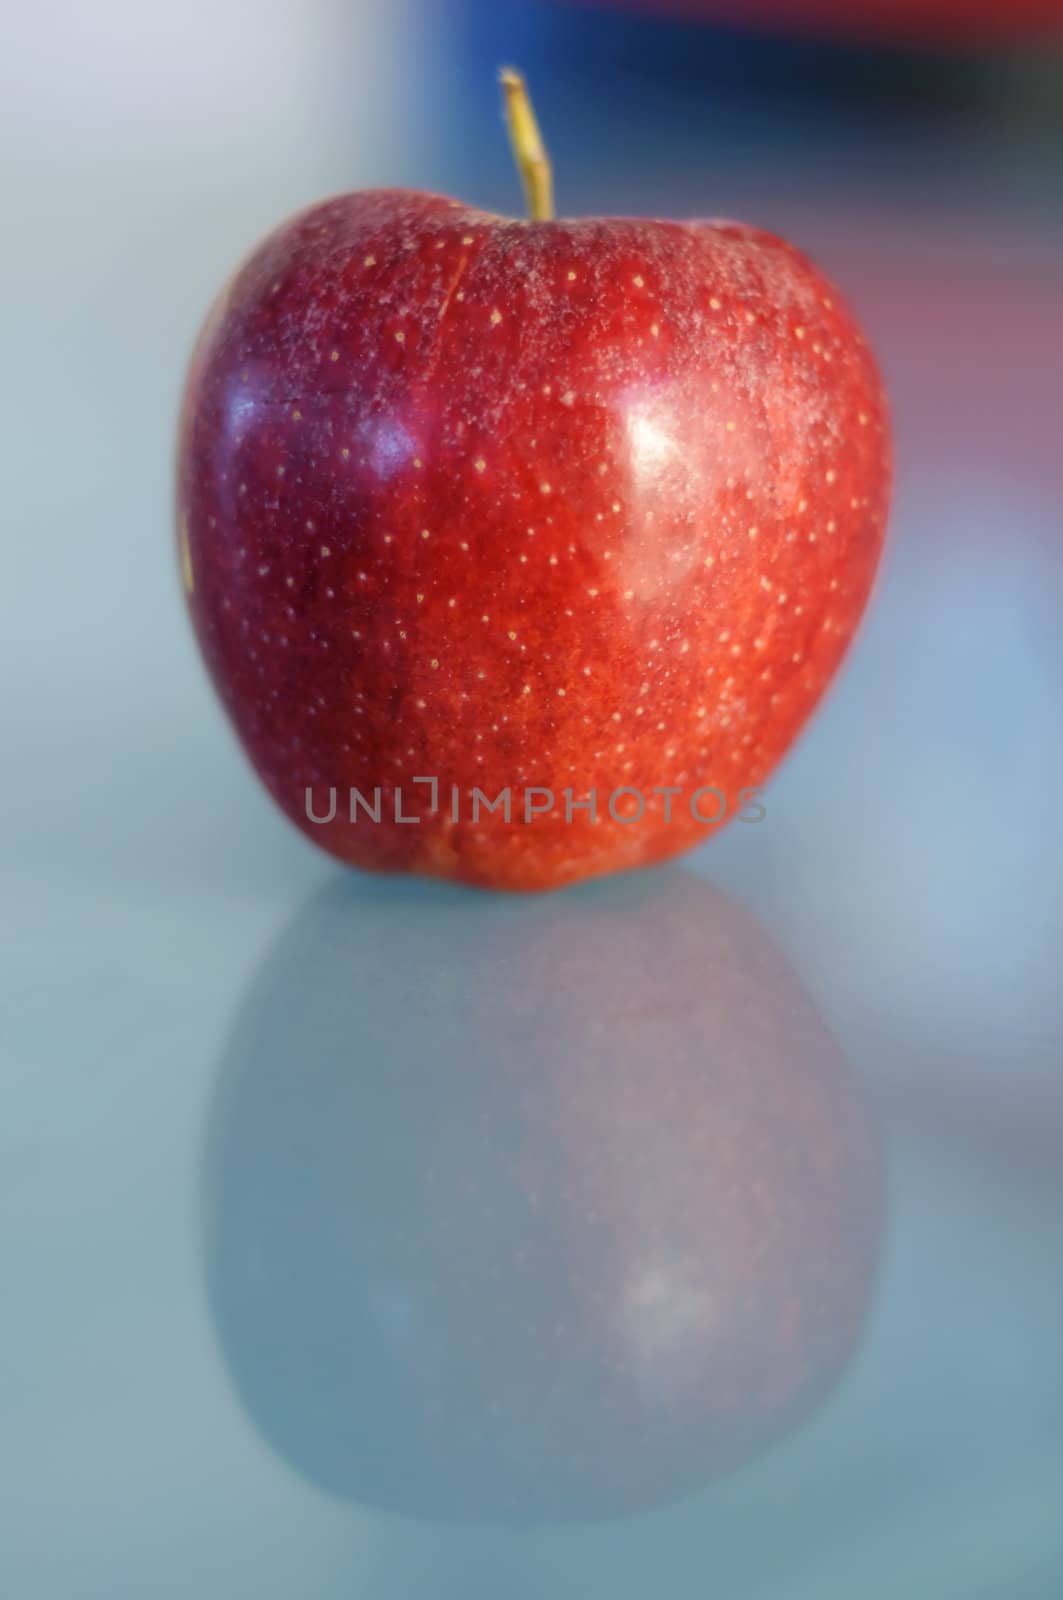 Red apple with its reflection on a table made of glass